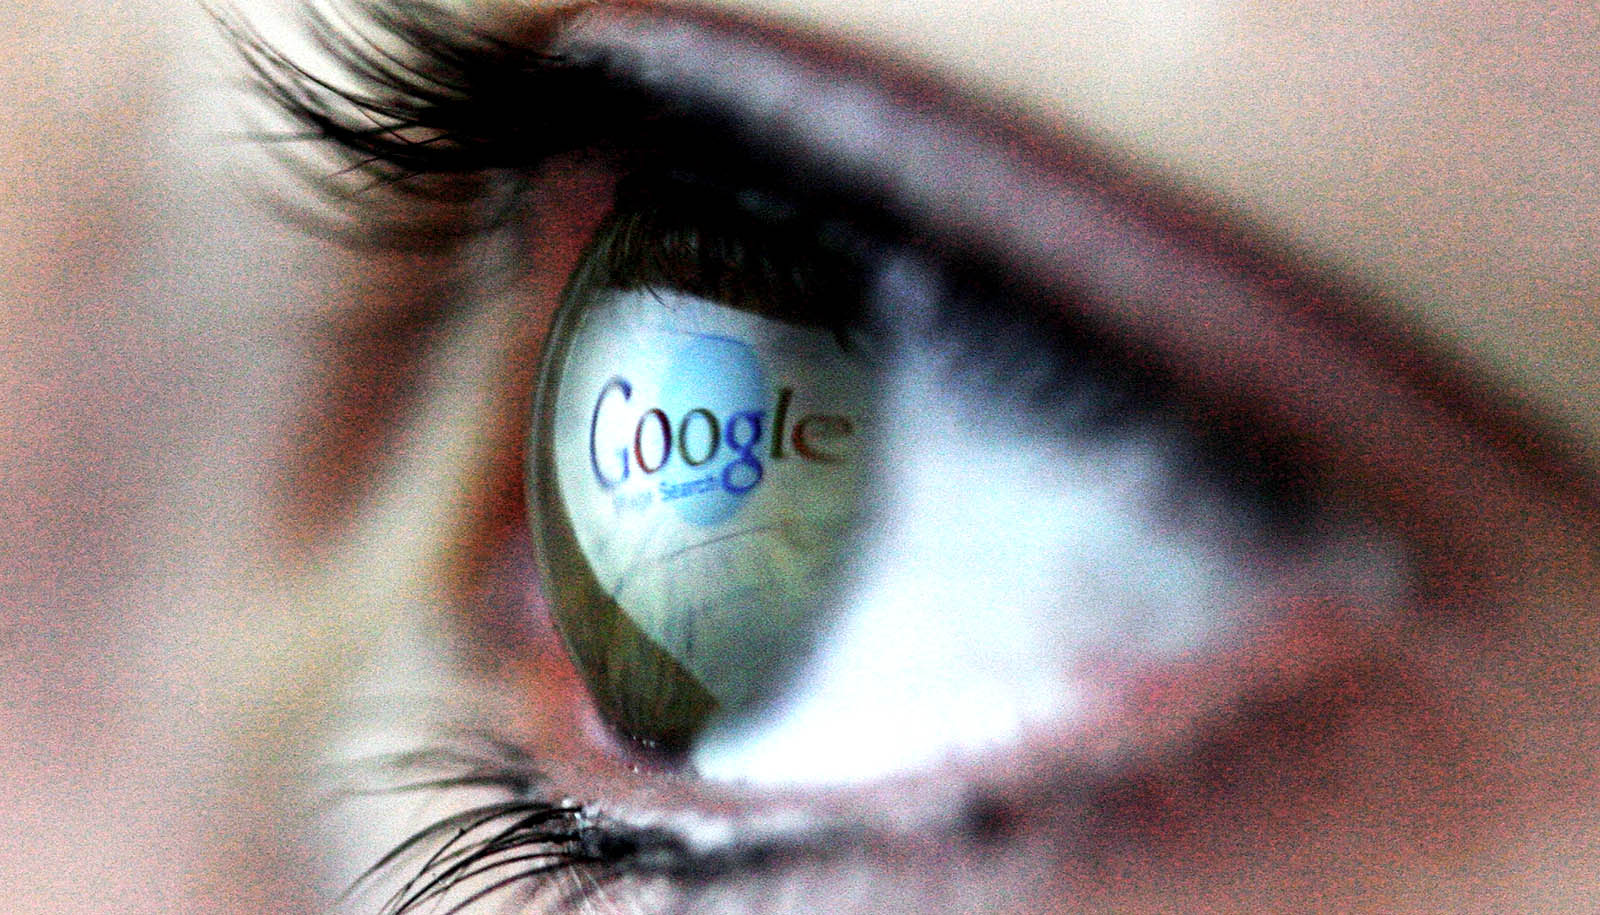 google search page reflected in eyeball